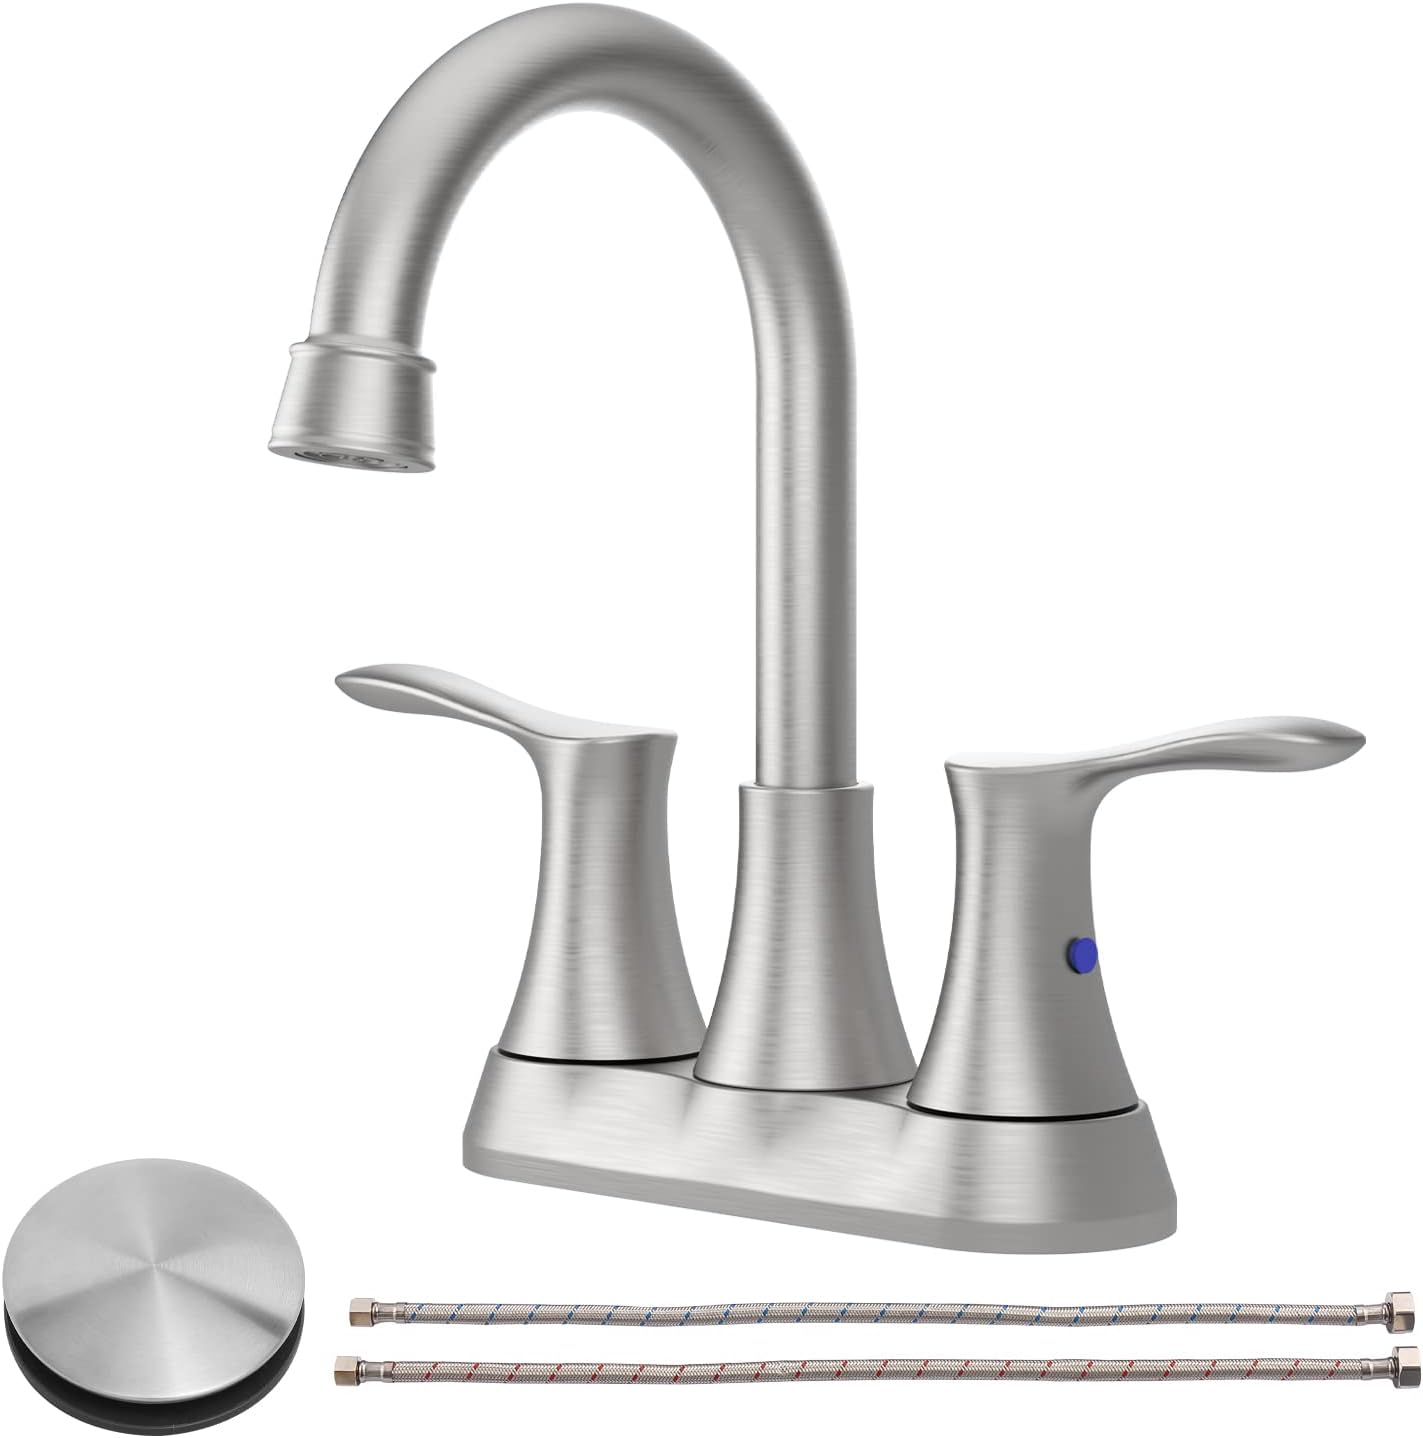 4051-NP  | Bathroom Faucet Brushed Nickel, 4" 2-Handle centerset basin faucet with Pop-up Drain & Supply Lines 11